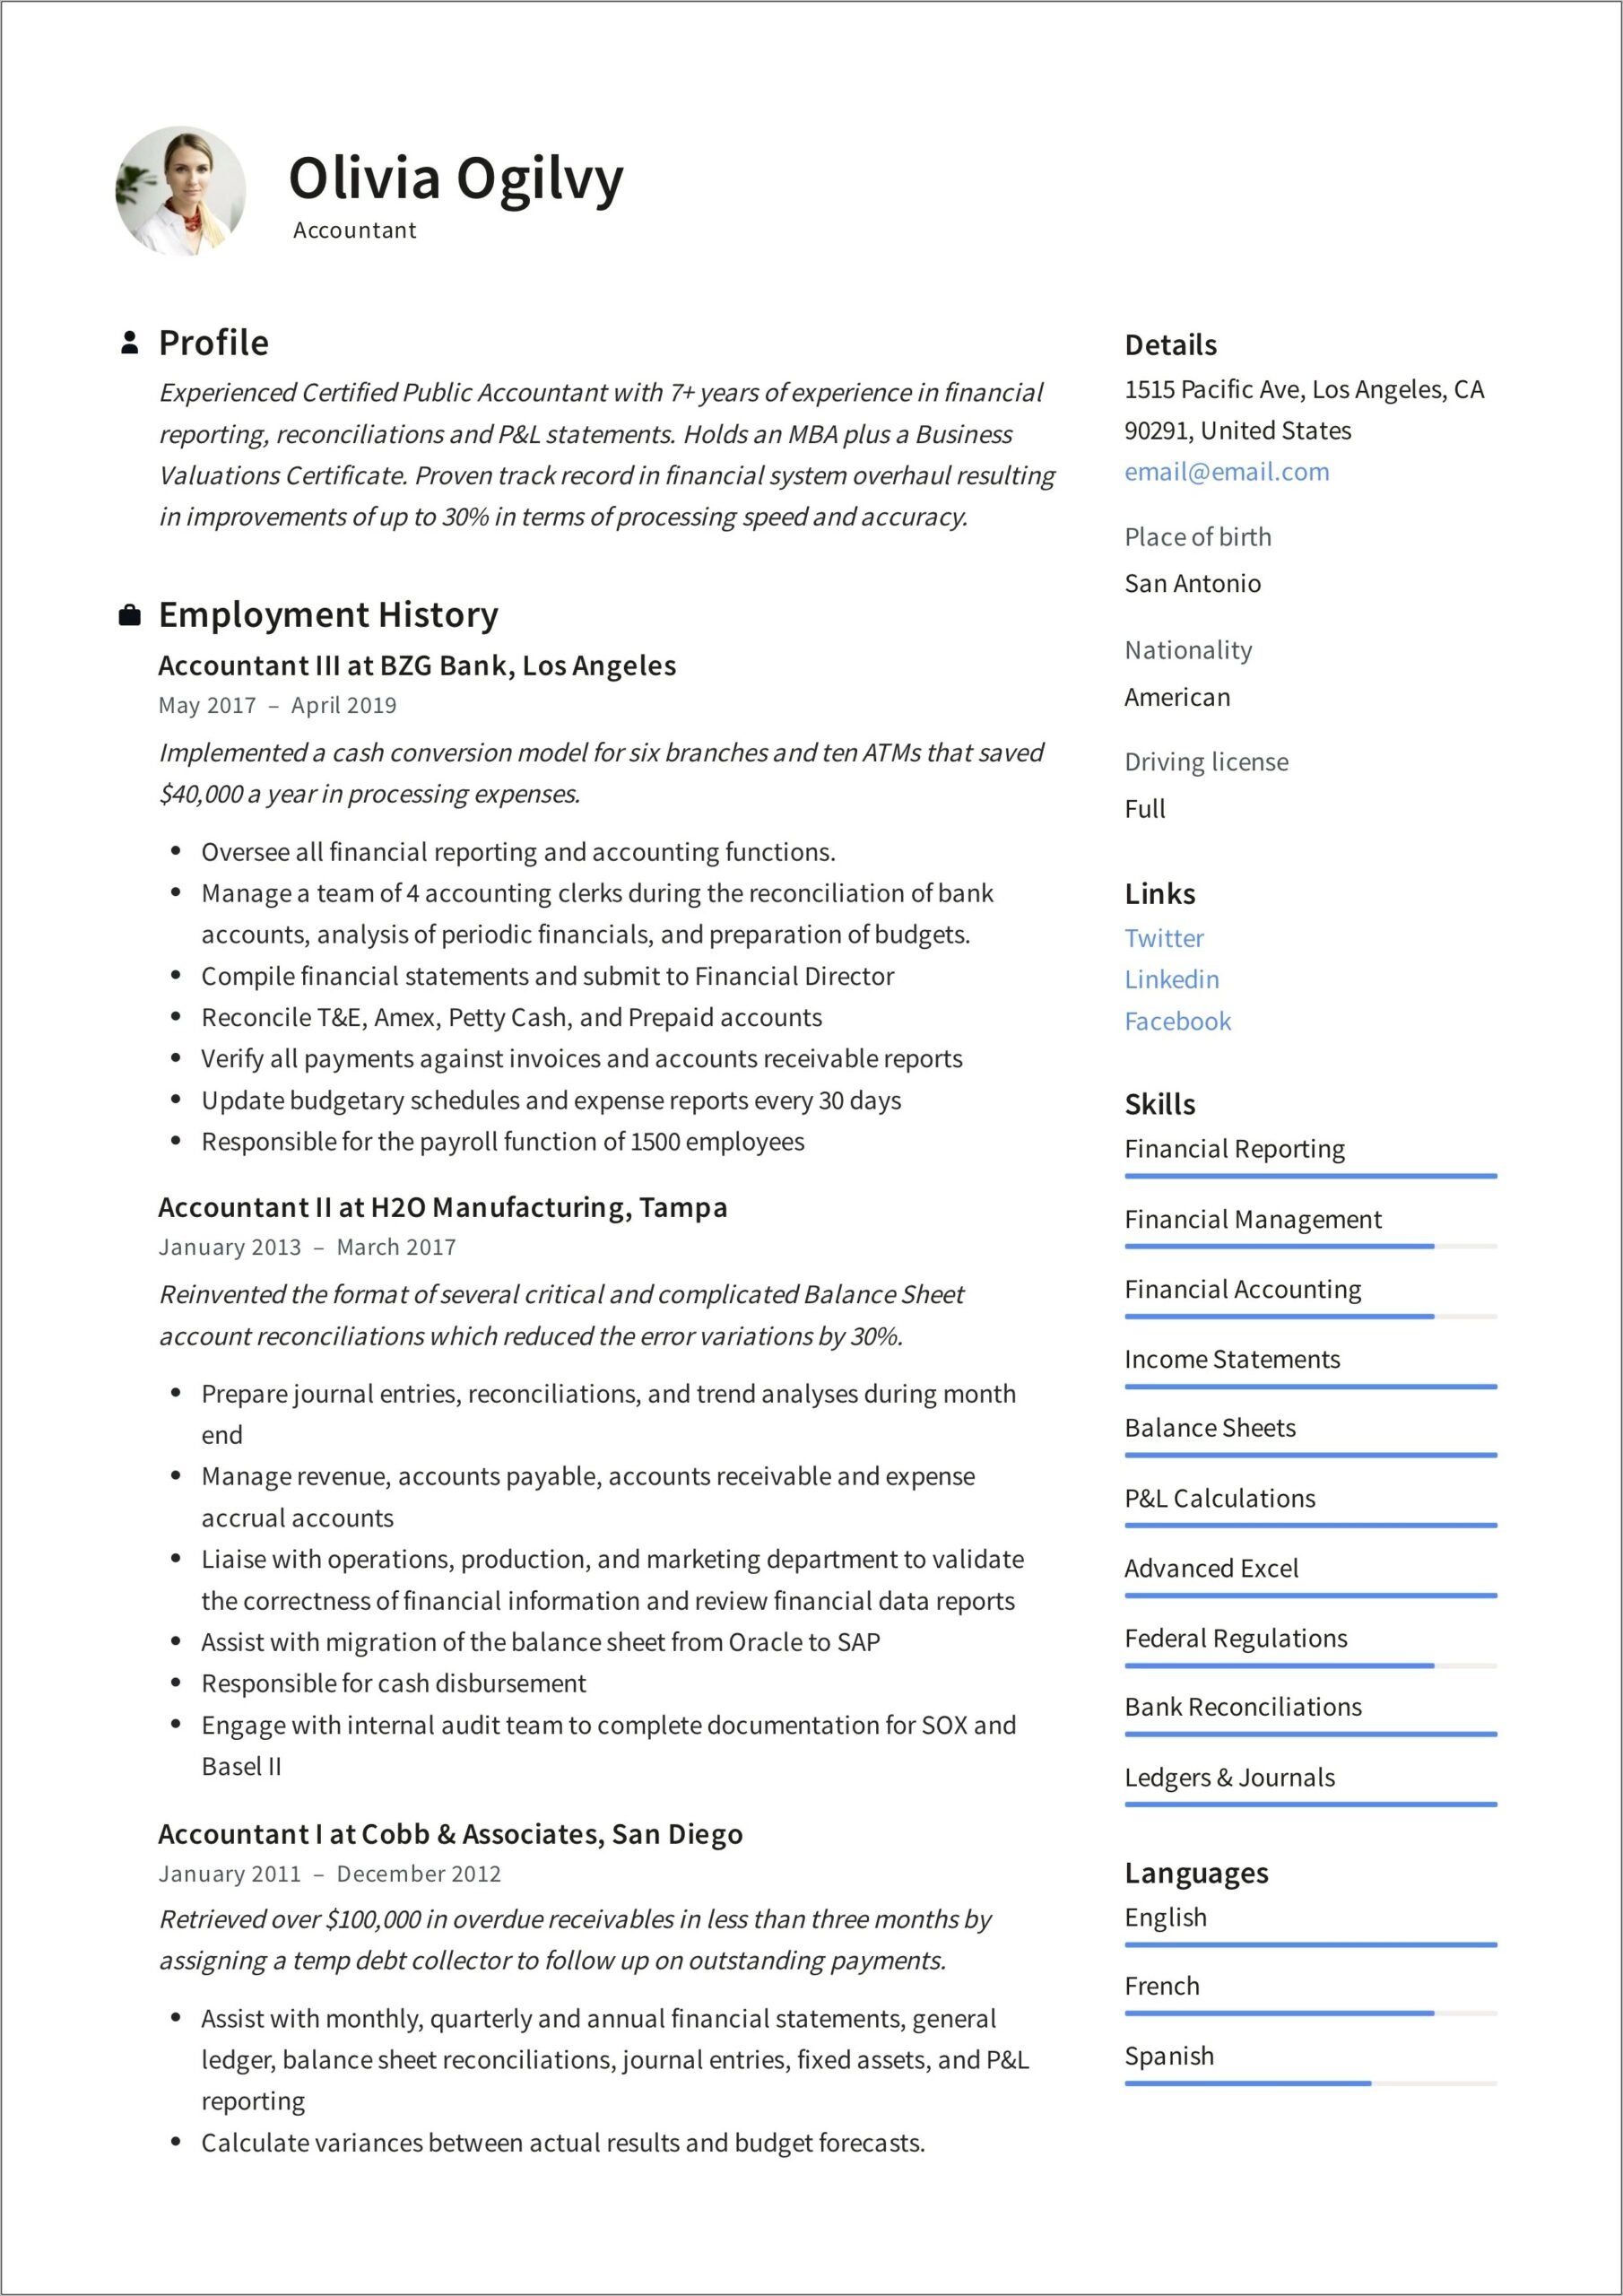 Resume Summary For A Investment Accountant